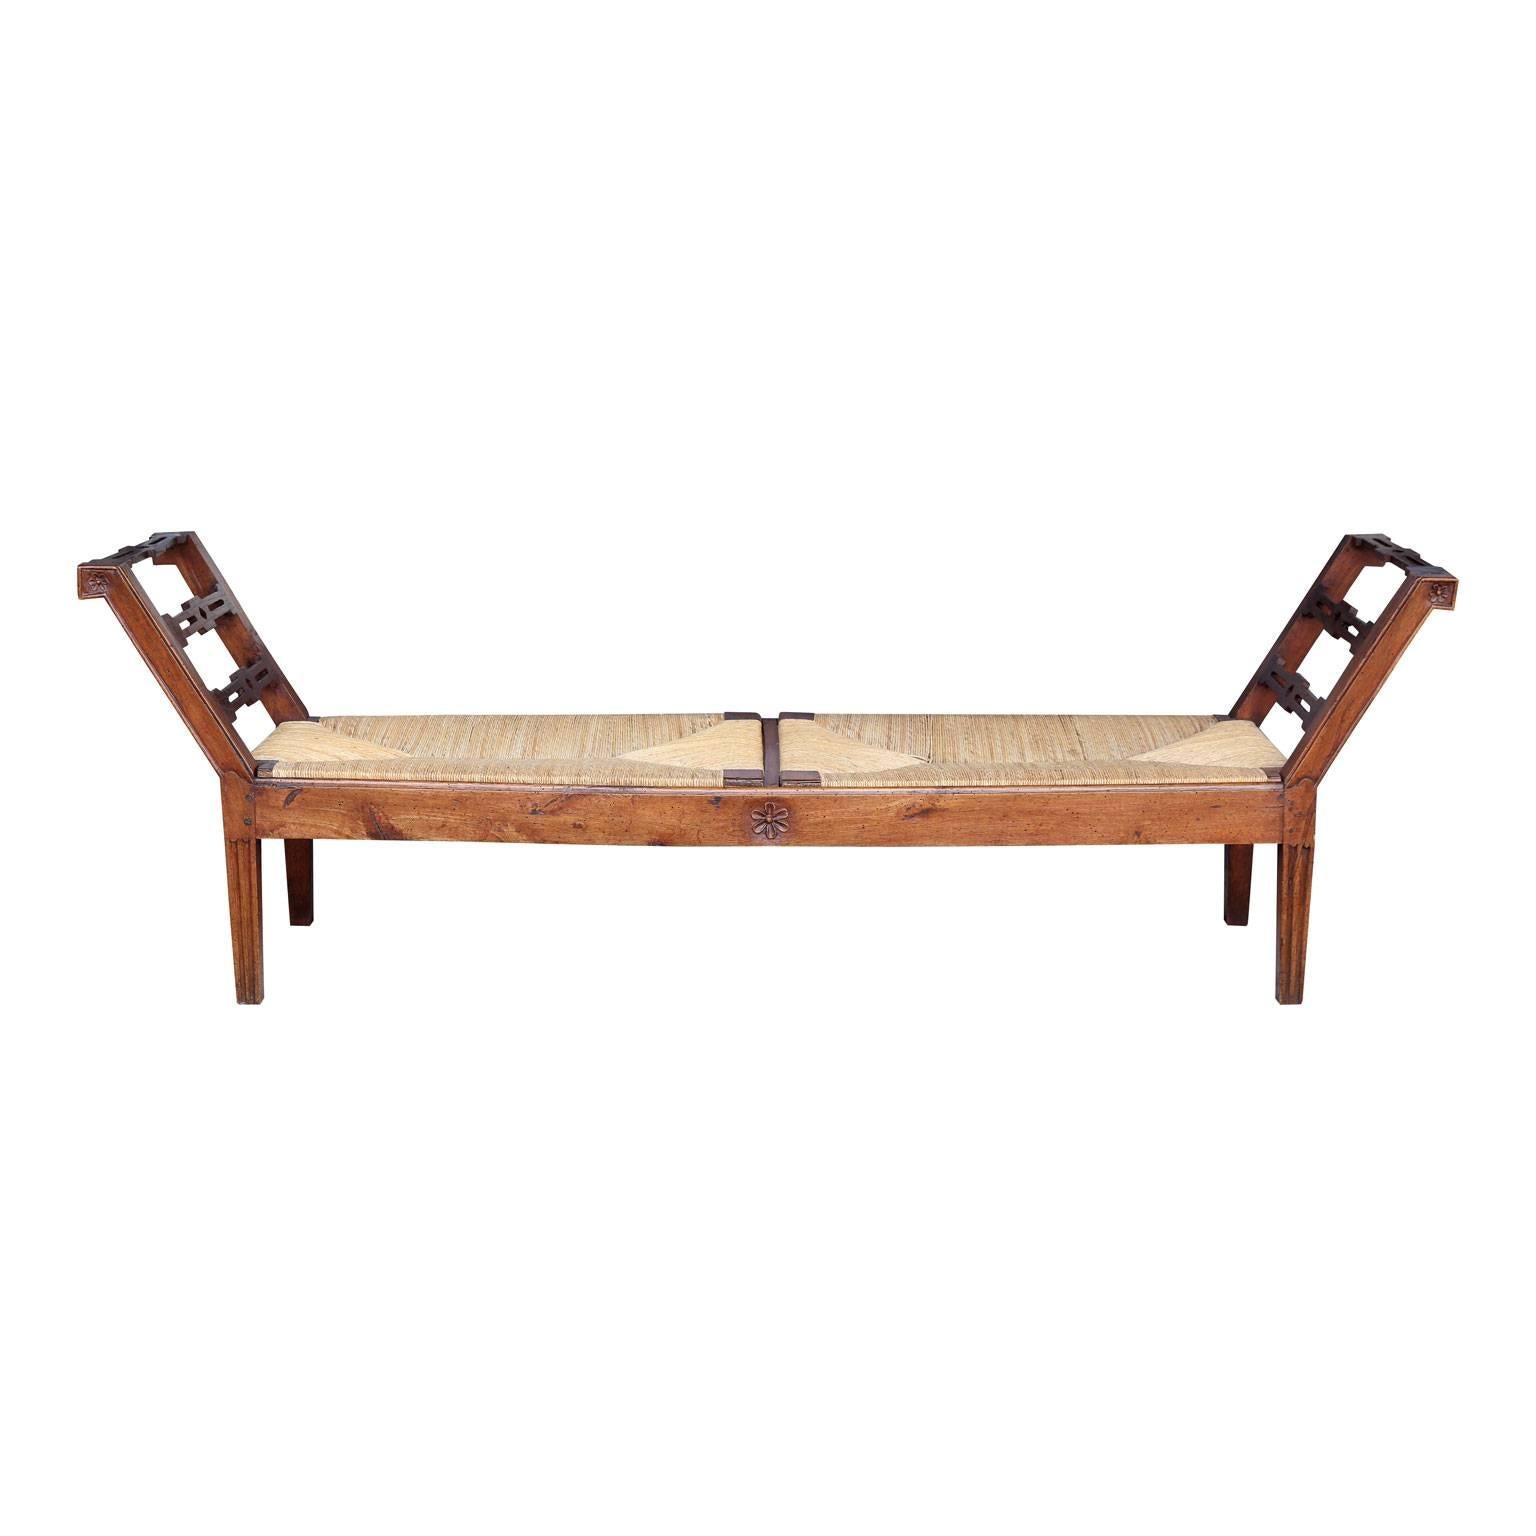 Early 19th century rush-seat bench from Tuscany, in walnut and oak with carved flower motif.